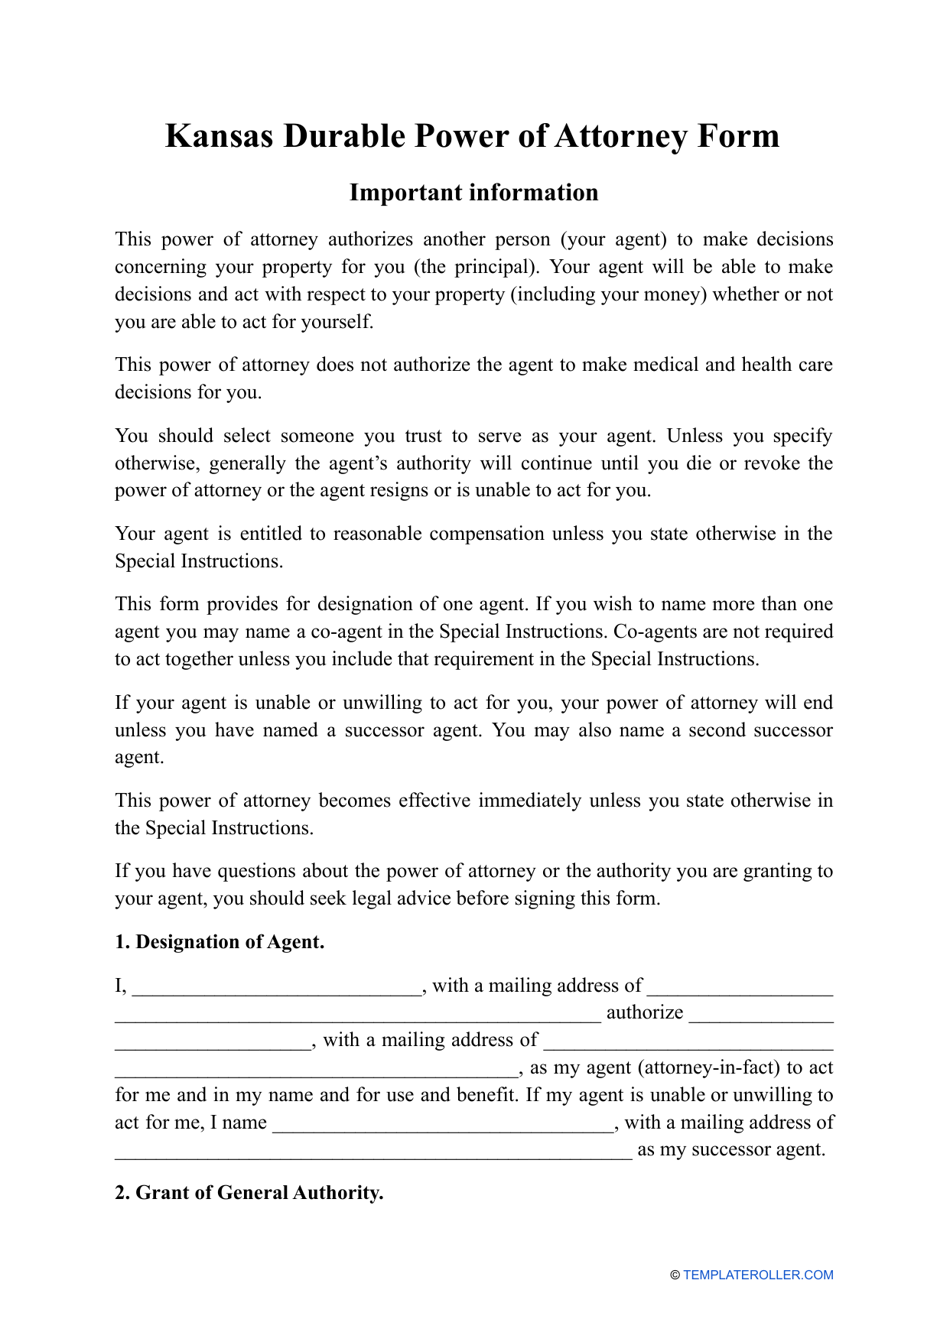 Durable Power of Attorney Form - Kansas, Page 1